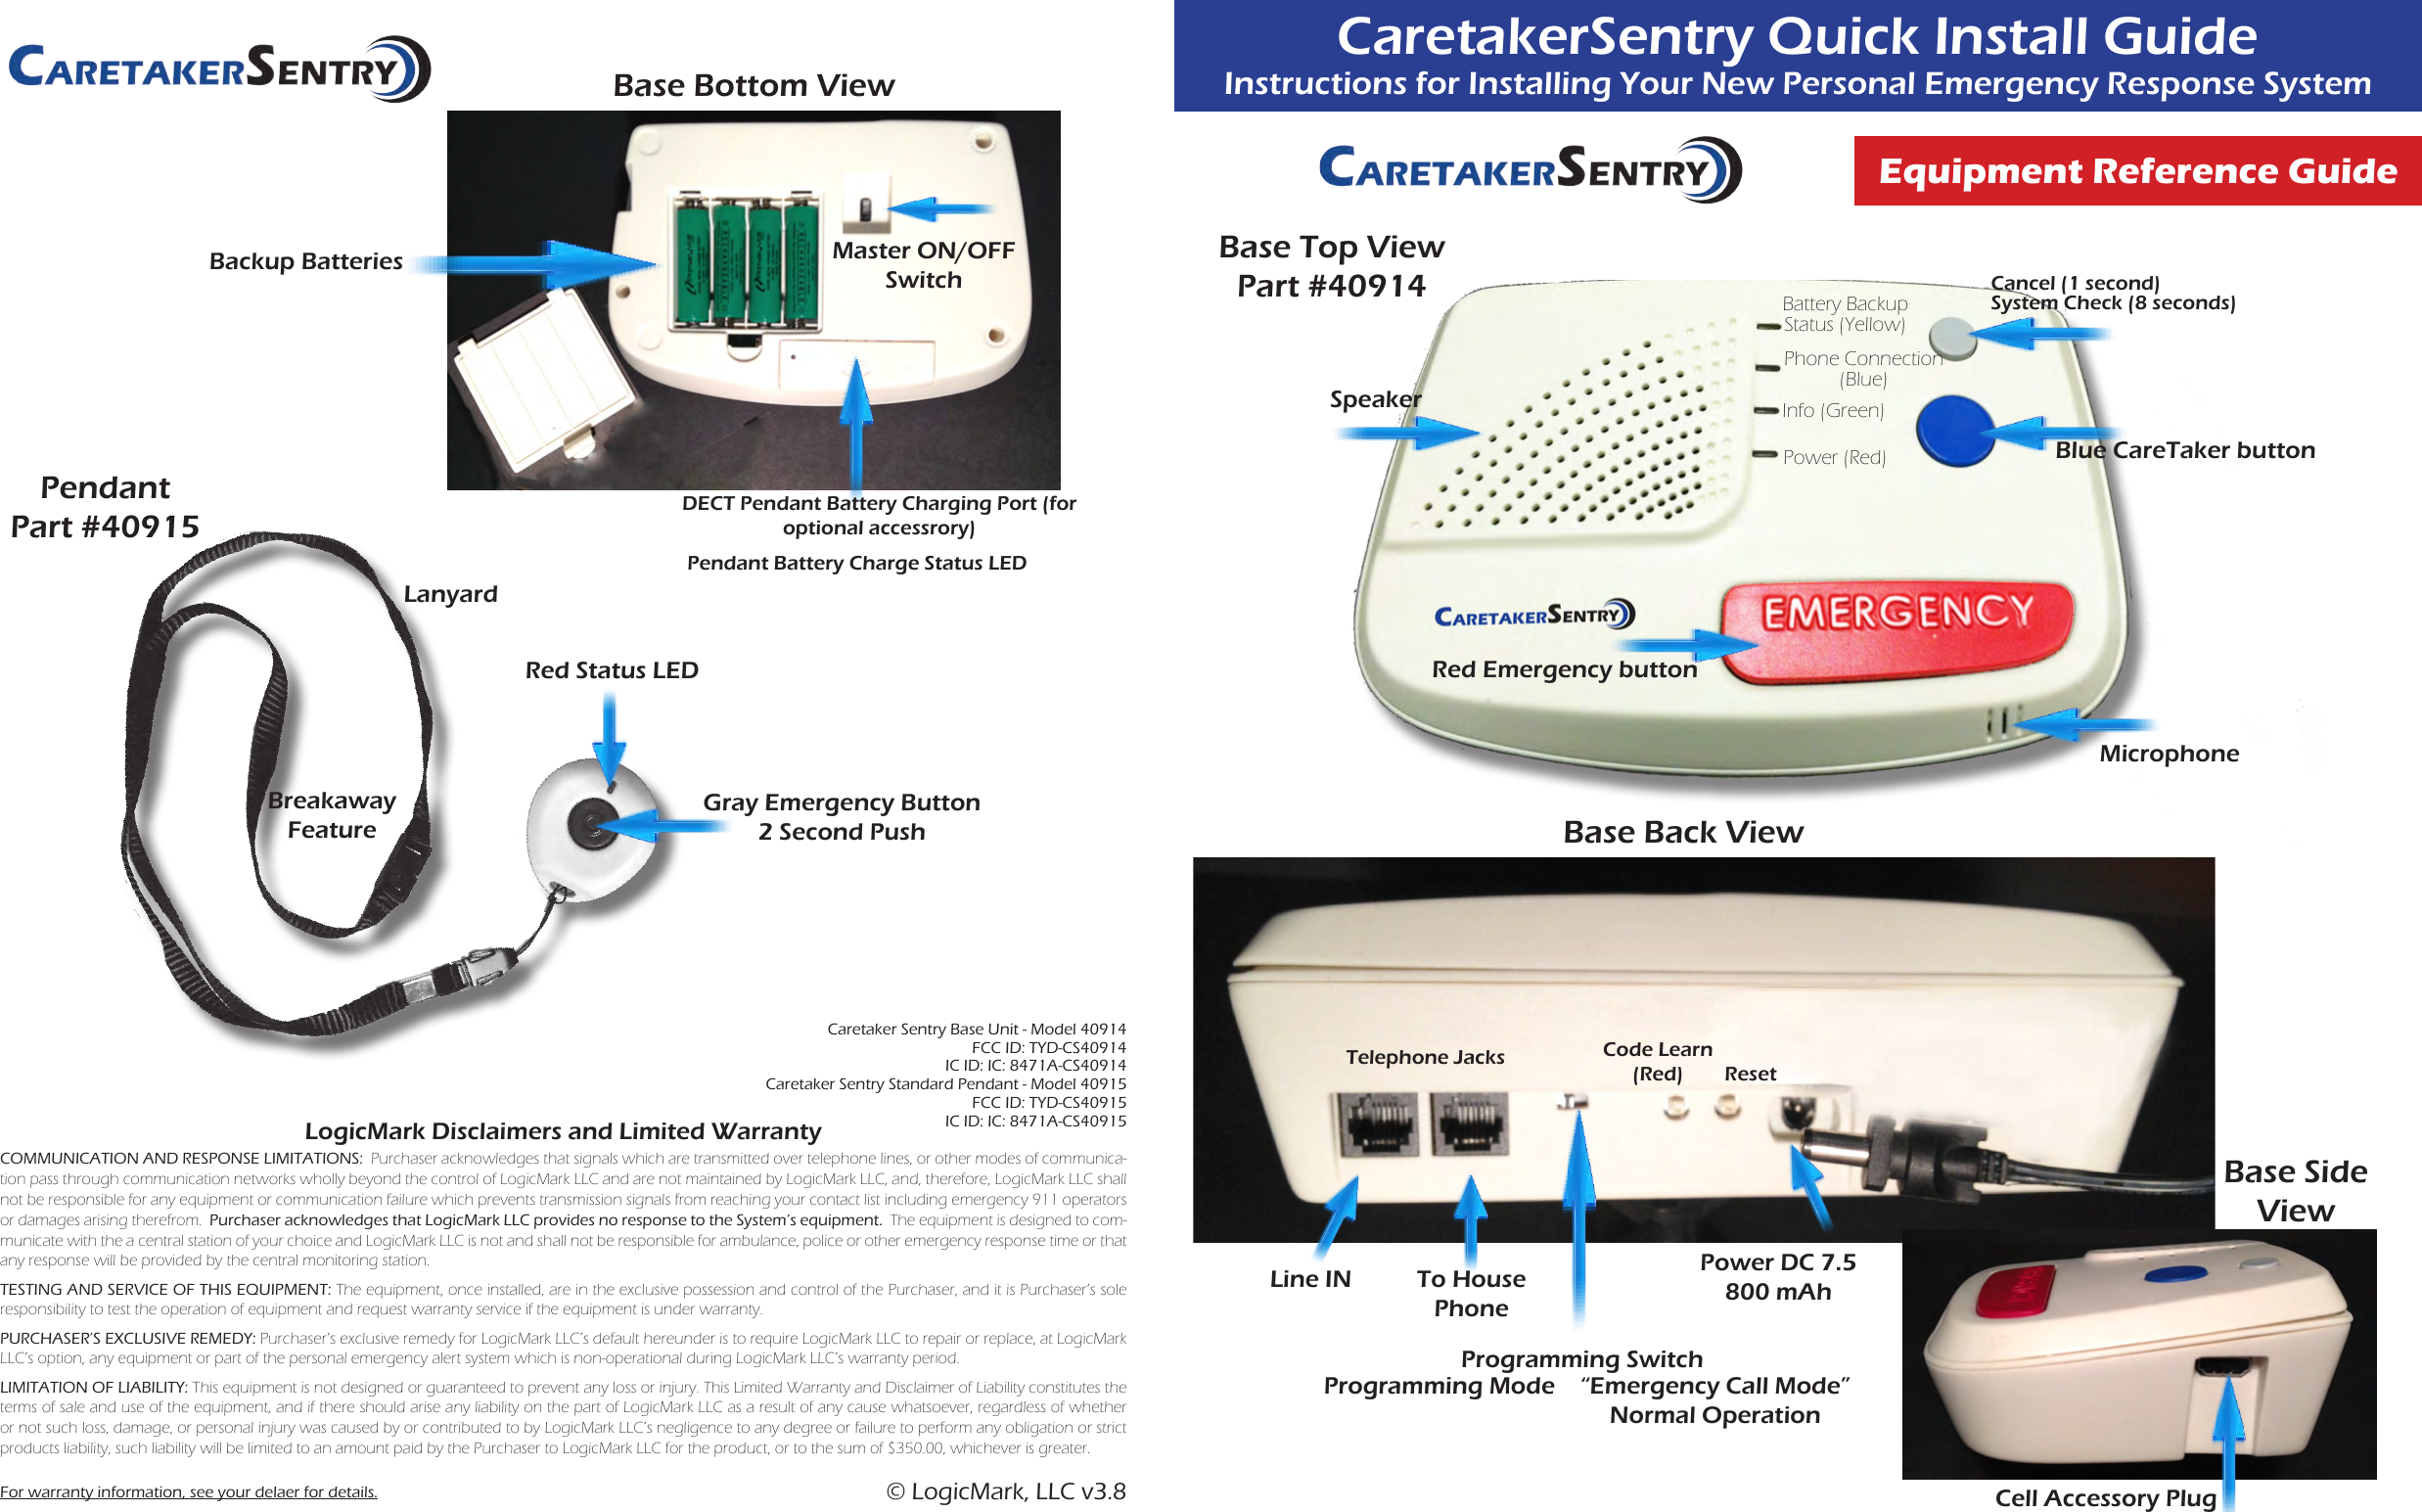 CaretakerSentry Quick Install GuideInstructions for Installing Your New Personal Emergency Response SystemEquipment Reference GuideLogicMark Disclaimers and Limited WarrantyCOMMUNICATION AND RESPONSE LIMITATIONS:  Purchaser acknowledges that signals which are transmitted over telephone lines, or other modes of communica-tion pass through communication networks wholly beyond the control of LogicMark LLC and are not maintained by LogicMark LLC, and, therefore, LogicMark LLC shall not be responsible for any equipment or communication failure which prevents transmission signals from reaching your contact list including emergency 911 operators or damages arising therefrom.  Purchaser acknowledges that LogicMark LLC provides no response to the System’s equipment.  The equipment is designed to com-municate with the a central station of your choice and LogicMark LLC is not and shall not be responsible for ambulance, police or other emergency response time or that any response will be provided by the central monitoring station.TESTING AND SERVICE OF THIS EQUIPMENT: The equipment, once installed, are in the exclusive possession and control of the Purchaser, and it is Purchaser’s sole responsibility to test the operation of equipment and request warranty service if the equipment is under warranty.PURCHASER’S EXCLUSIVE REMEDY: Purchaser’s exclusive remedy for LogicMark LLC’s default hereunder is to require LogicMark LLC to repair or replace, at LogicMark LLC’s option, any equipment or part of the personal emergency alert system which is non-operational during LogicMark LLC’s warranty period.LIMITATION OF LIABILITY: This equipment is not designed or guaranteed to prevent any loss or injury. This Limited Warranty and Disclaimer of Liability constitutes the terms of sale and use of the equipment, and if there should arise any liability on the part of LogicMark LLC as a result of any cause whatsoever, regardless of whether or not such loss, damage, or personal injury was caused by or contributed to by LogicMark LLC’s negligence to any degree or failure to perform any obligation or strict products liability, such liability will be limited to an amount paid by the Purchaser to LogicMark LLC for the product, or to the sum of $350.00, whichever is greater.For warranty information, see your delaer for details.Backup BatteriesBase Bottom ViewMaster ON/OFF SwitchDECT Pendant Battery Charging Port (for optional accessrory)Pendant Battery Charge Status LEDPendantPart #40915Gray Emergency Button2 Second PushRed Status LEDBreakaway FeatureLanyardBase Top ViewPart #40914Red Emergency buttonPhone Connection (Blue)Info (Green)Power (Red) Blue CareTaker buttonMicrophoneBattery Backup Status (Yellow)SpeakerCancel (1 second)System Check (8 seconds)Base Back ViewTelephone JacksLine IN To House Phone Programming SwitchProgramming Mode “Emergency Call Mode”Normal OperationResetPower DC 7.5 800 mAhCode Learn(Red)Cell Accessory PlugBase Side View© LogicMark, LLC v3.8Caretaker Sentry Base Unit - Model 40914 FCC ID: TYD-CS40914 IC ID: IC: 8471A-CS40914 Caretaker Sentry Standard Pendant - Model 40915 FCC ID: TYD-CS40915 IC ID: IC: 8471A-CS40915